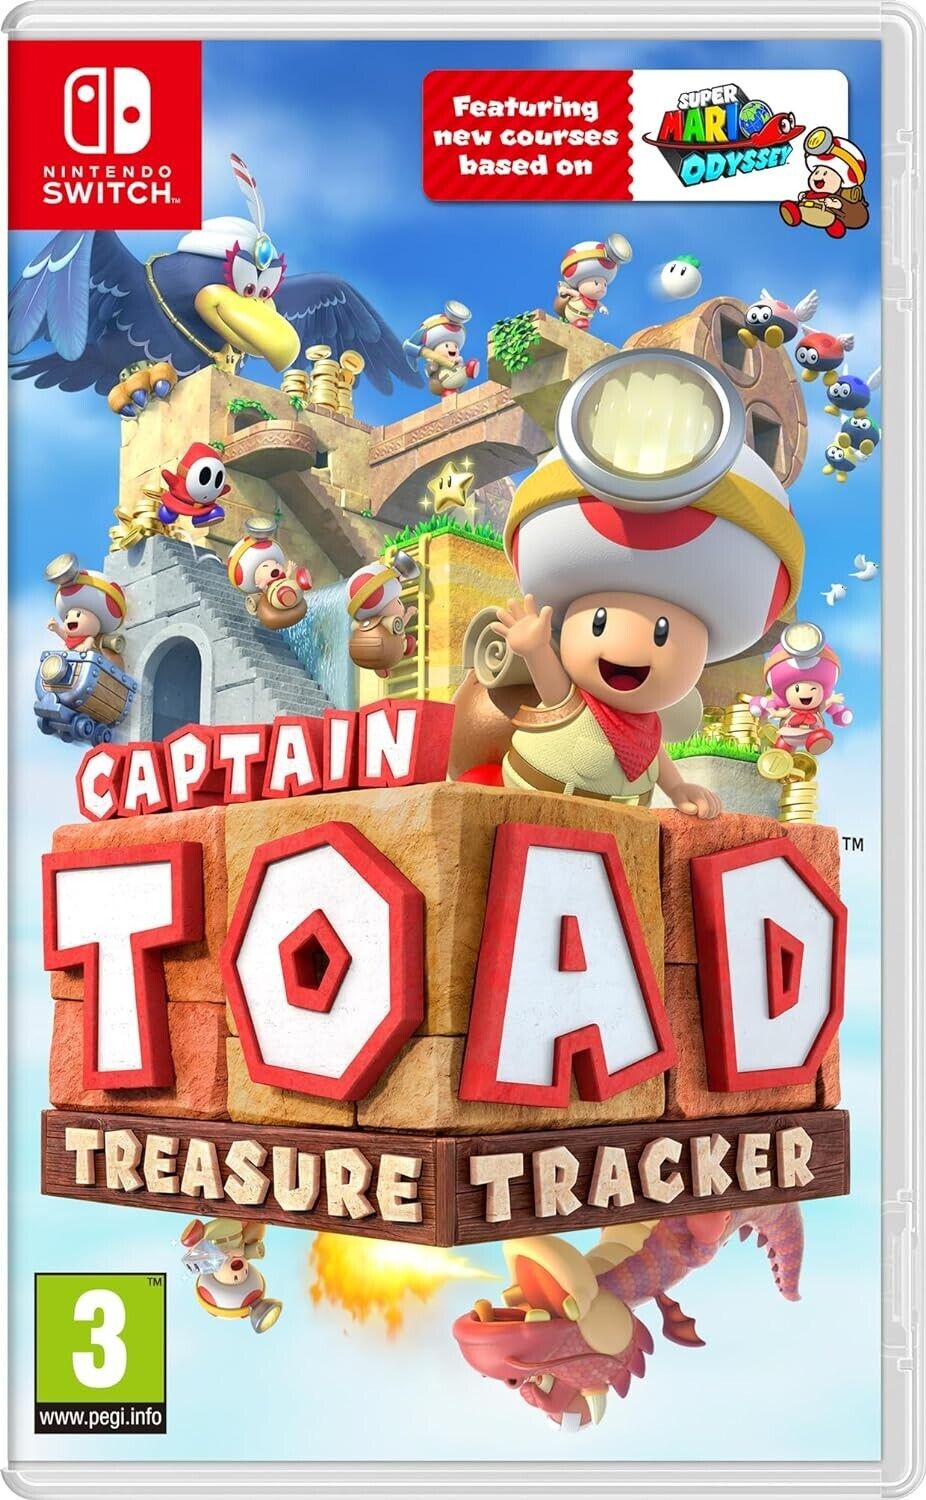 Captain Toad: Treasure Tracker (Nintendo Switch) - Brand new and Factory sealed